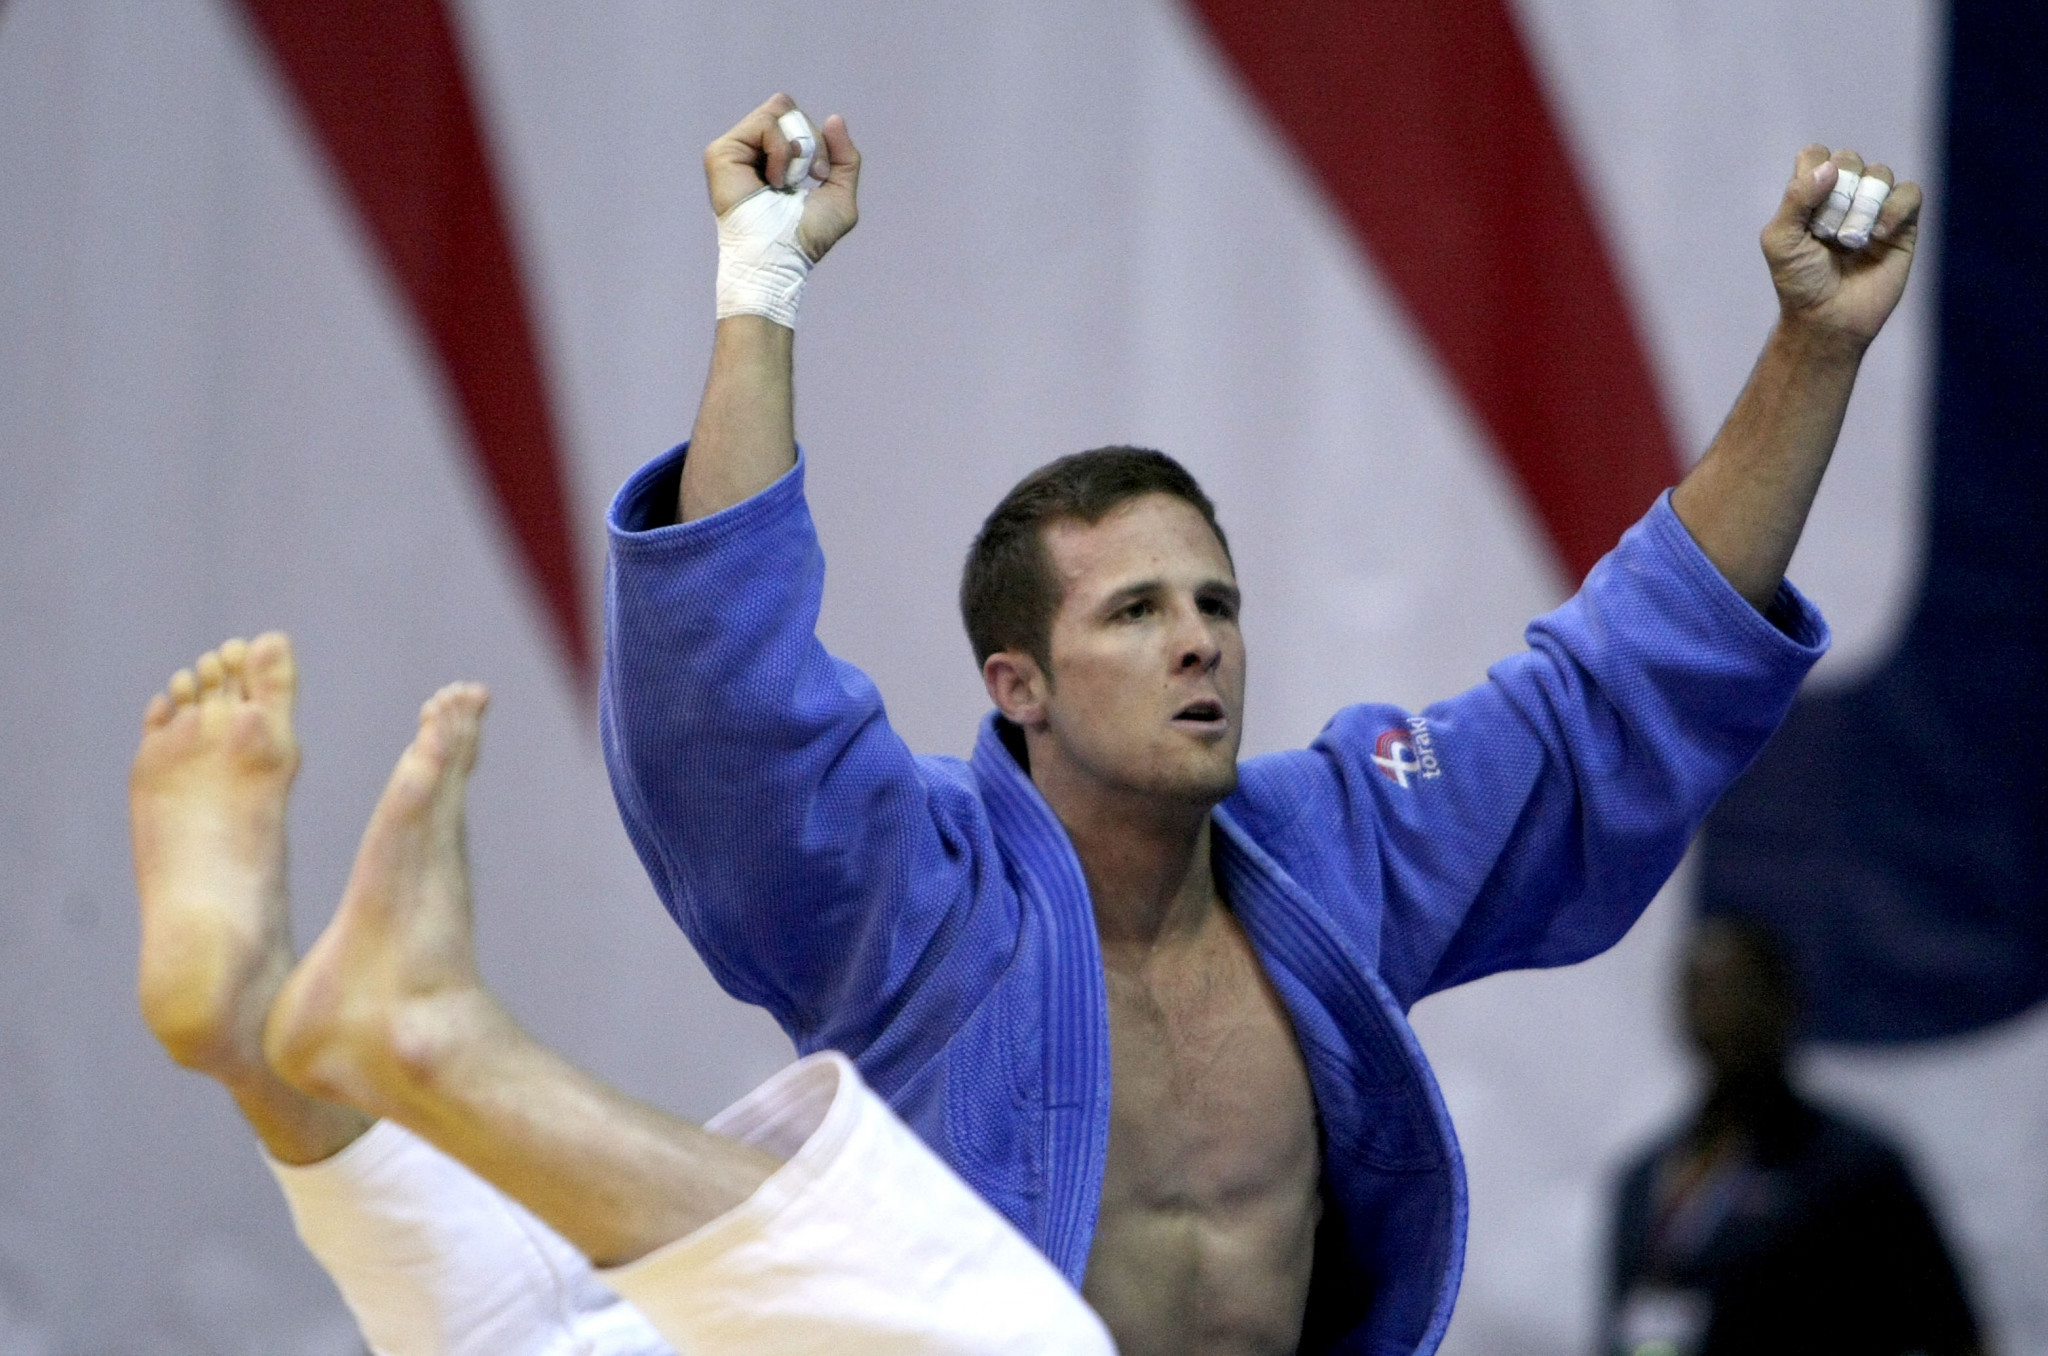 Ryan Reser held three demonstrations as part of the World Judo Day celebrations ©Getty Images